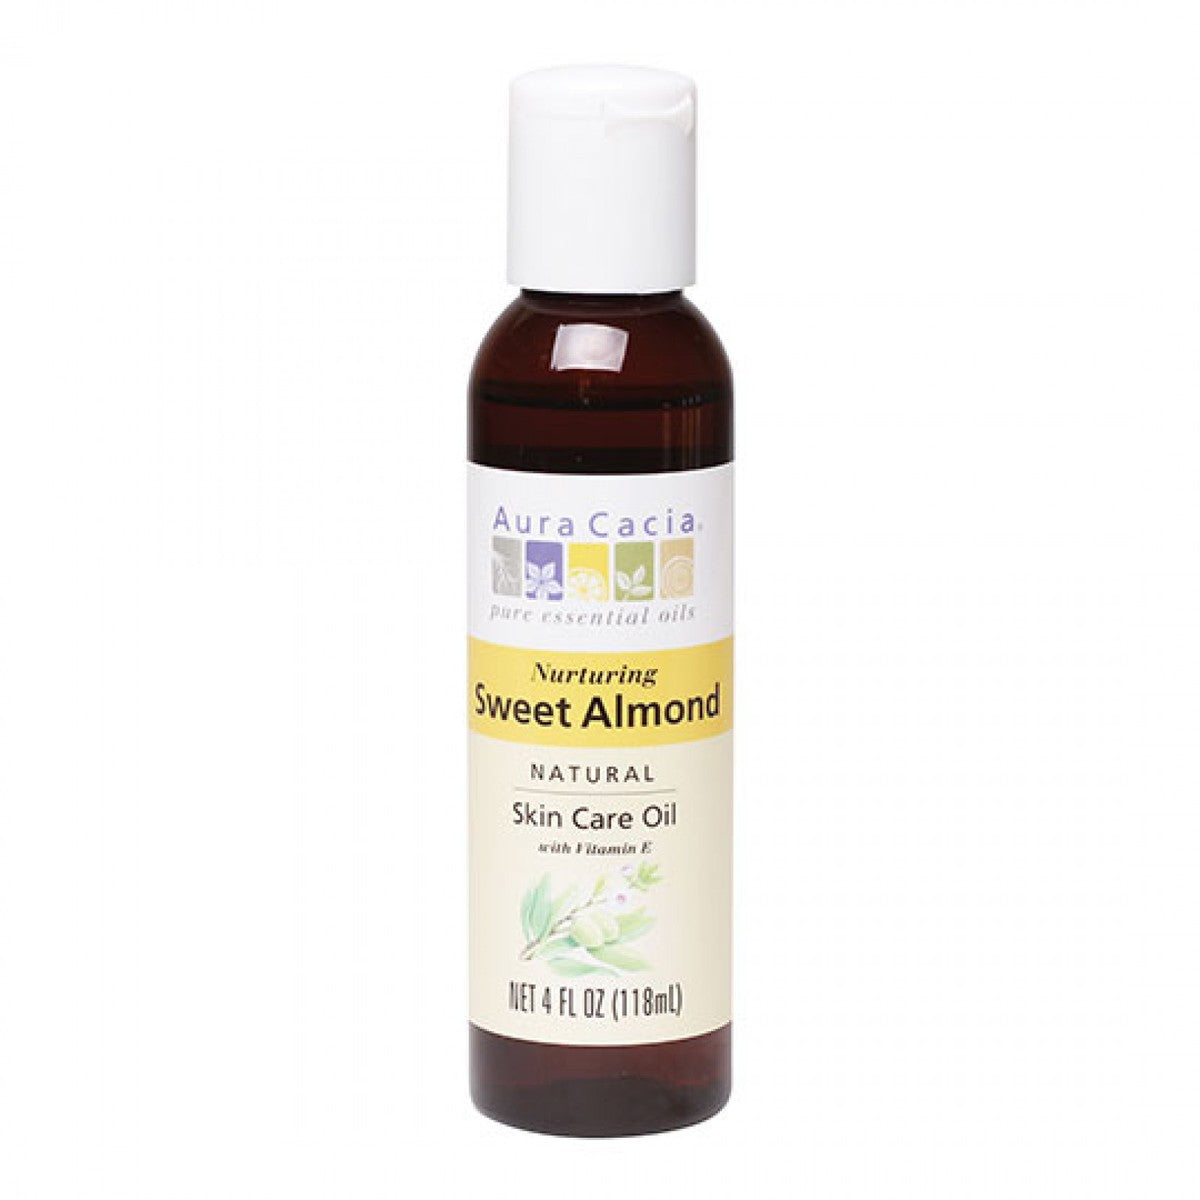 Primary image of Sweet Almond Oil